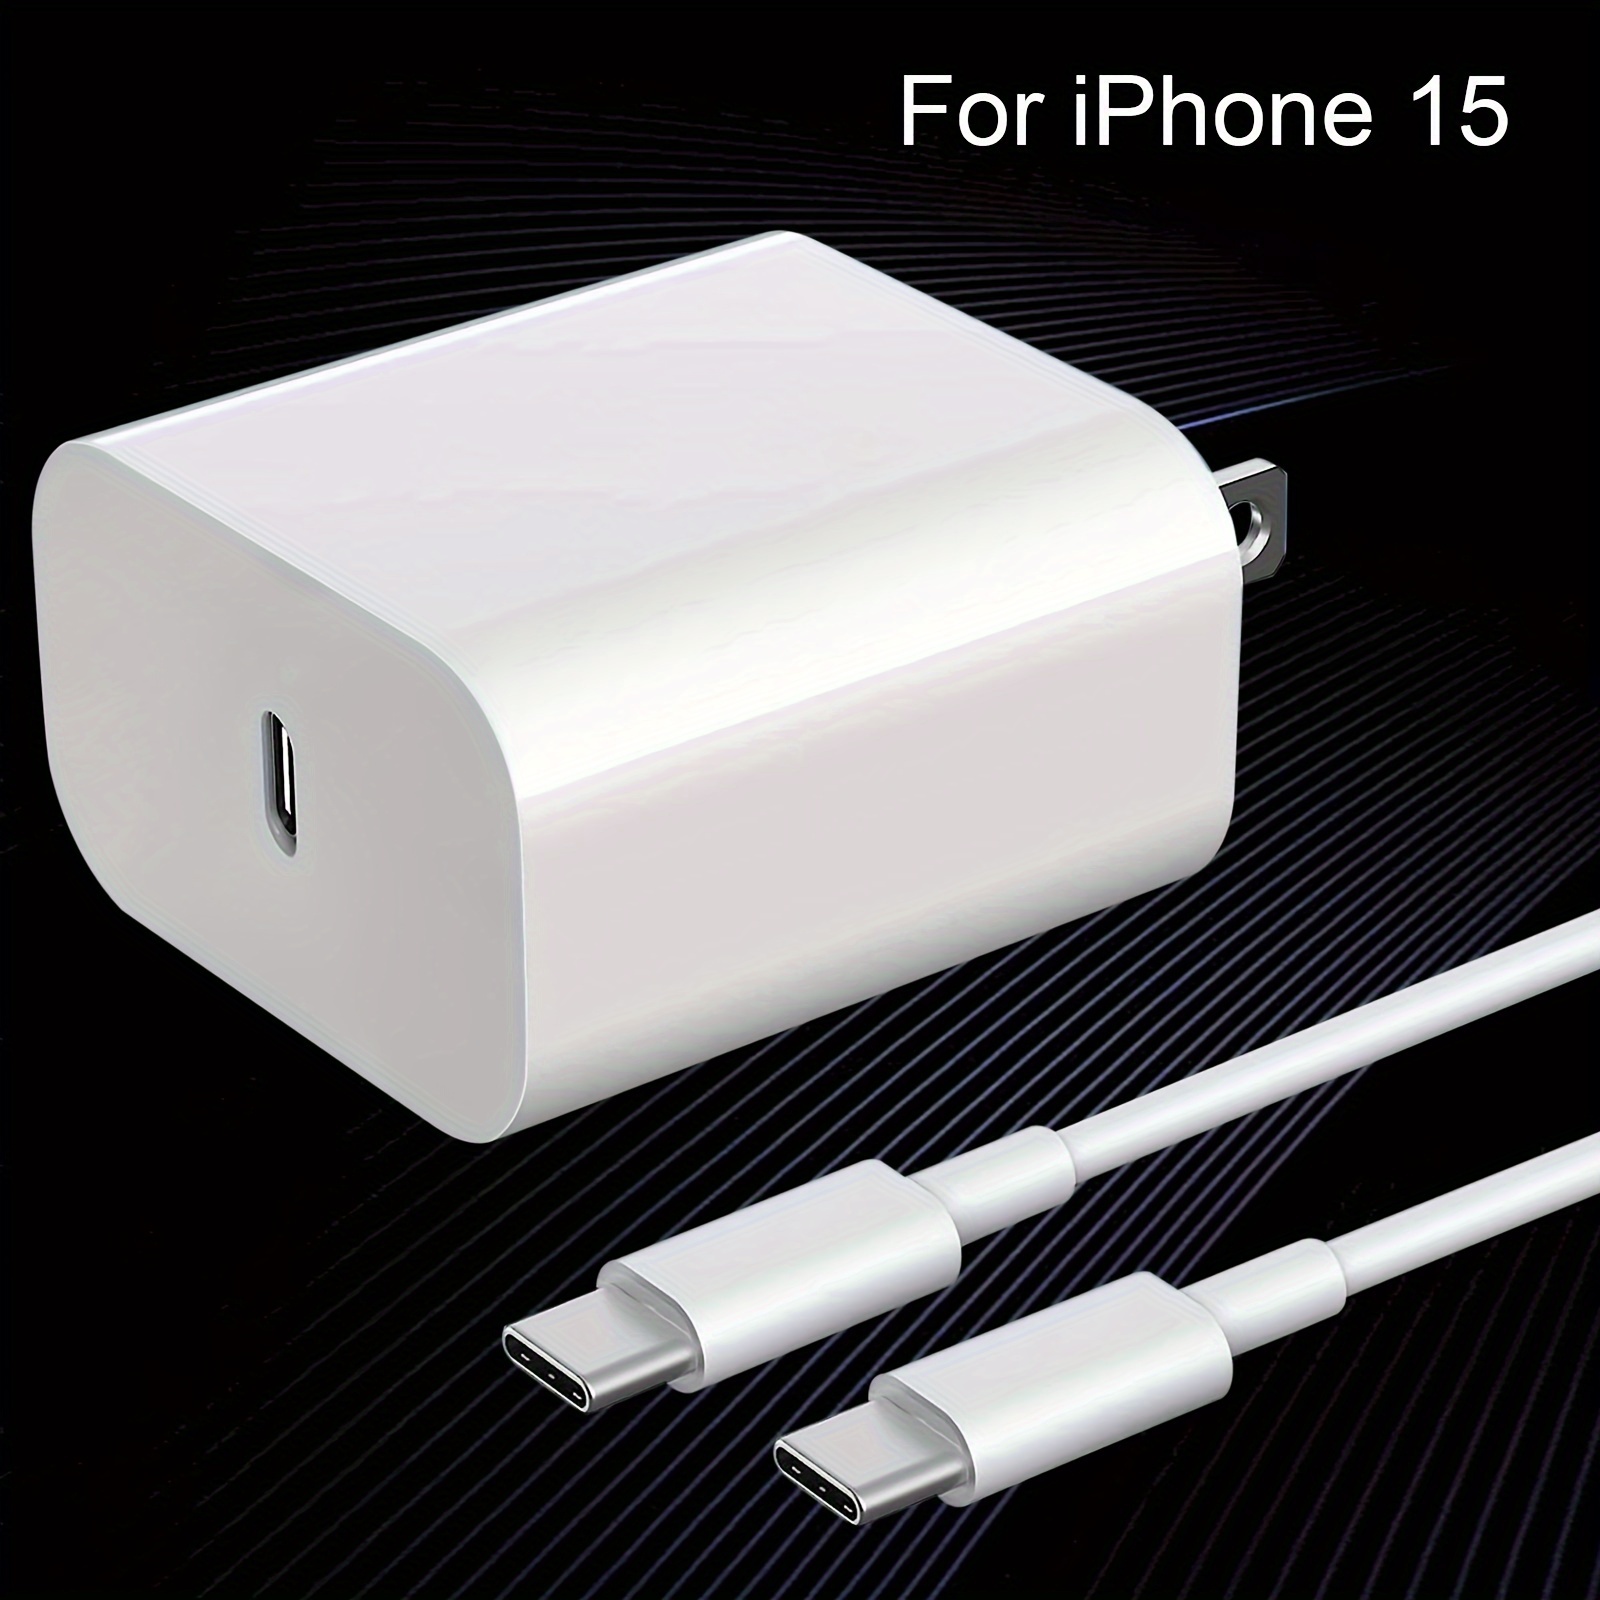 cable iphone chargeur usb chargeur iphone cable iphone apple cable  lightning iphone 11 iphone 12 iphone 13 prise usb chargeur iphone 12 cable  usb chargeur rapide iphone